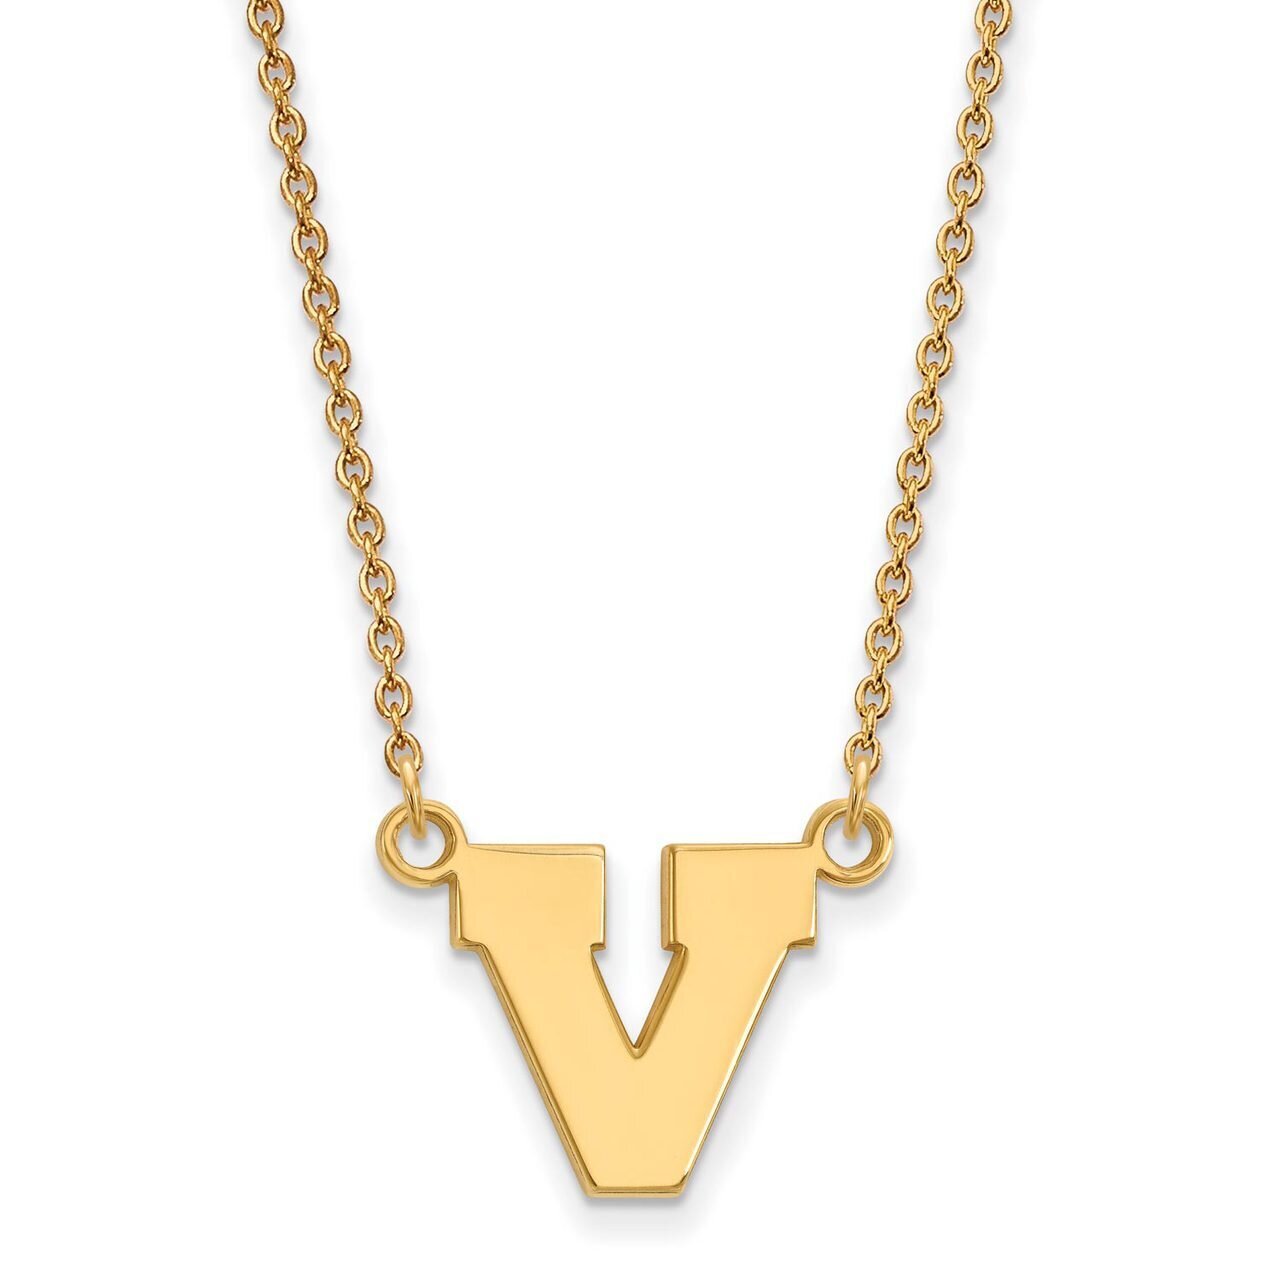 University of Virginia Small Pendant with Chain Necklace 10k Yellow Gold 1Y054UVA-18